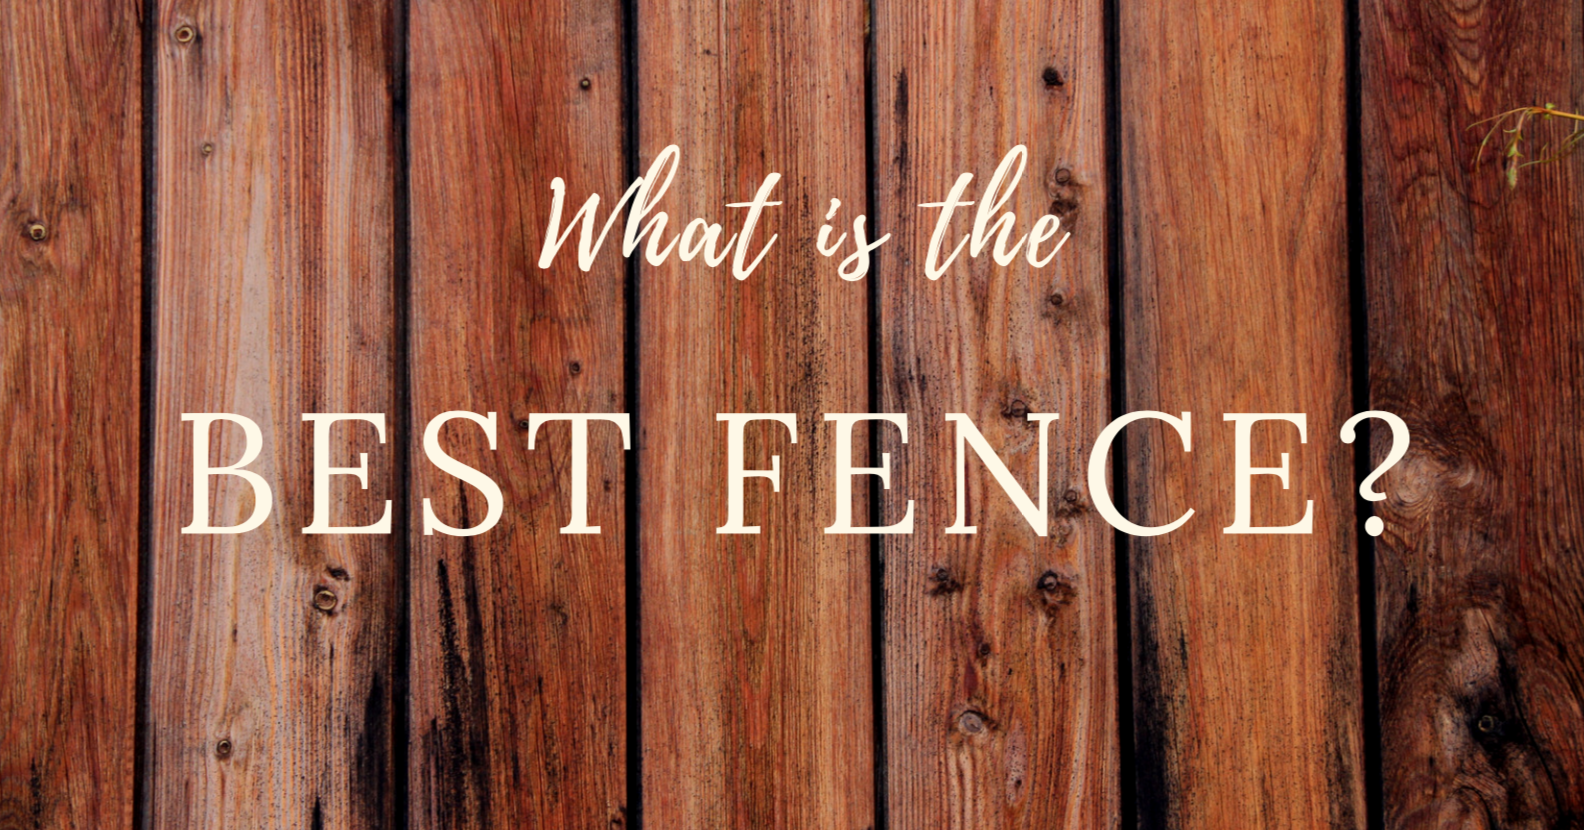 What is the Best Fence?